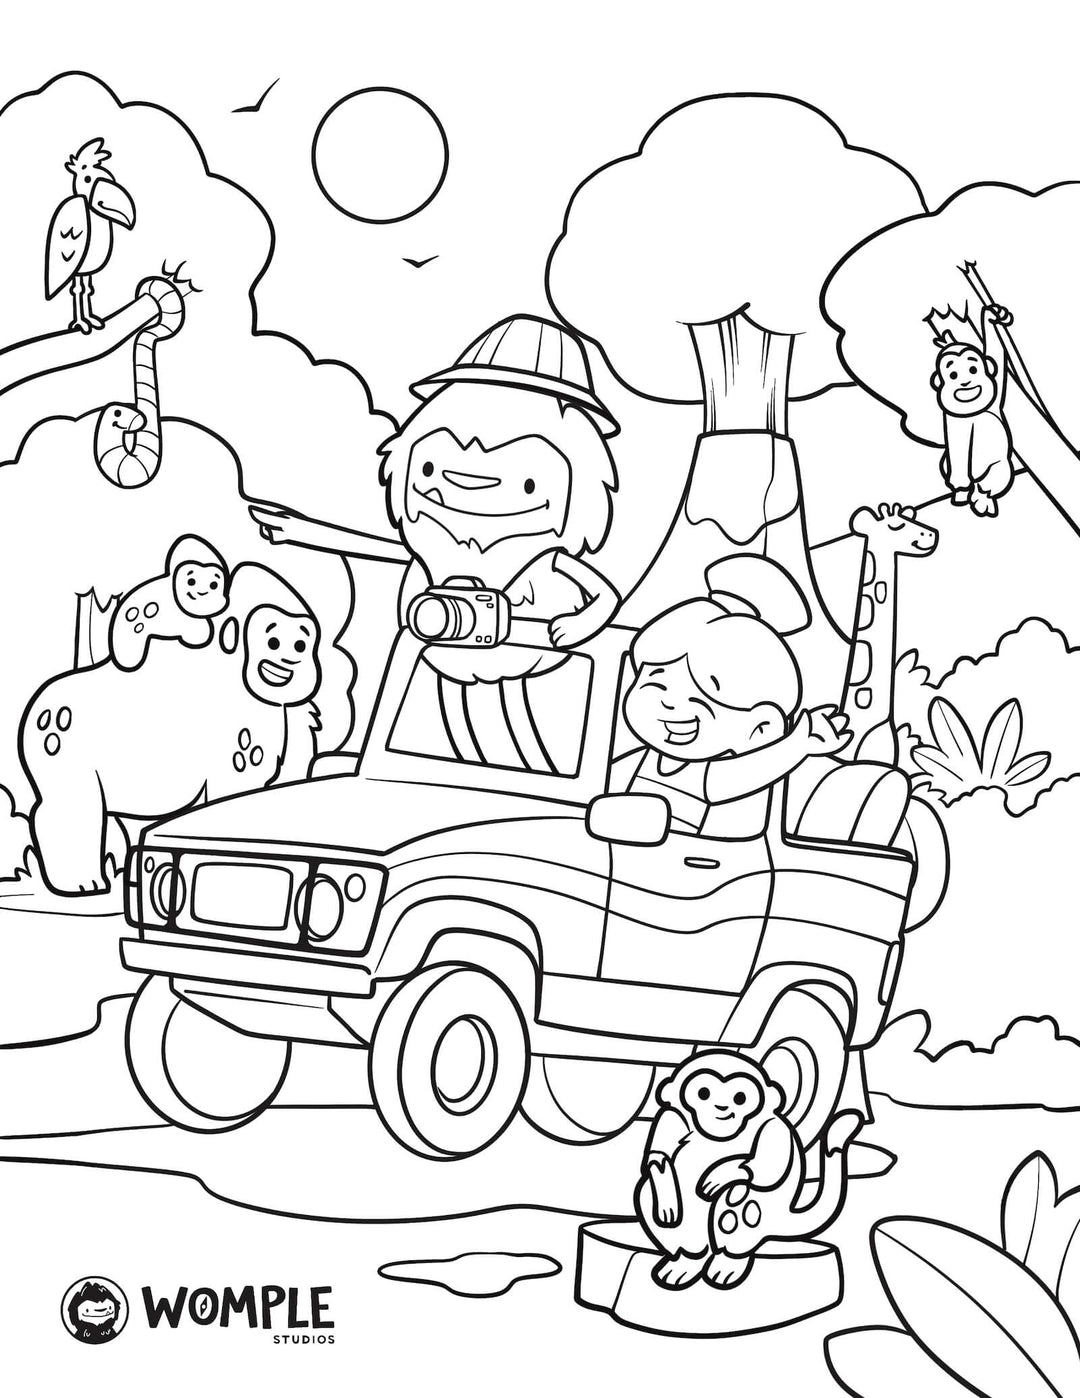 Womple Studios | African Safari Coloring Page